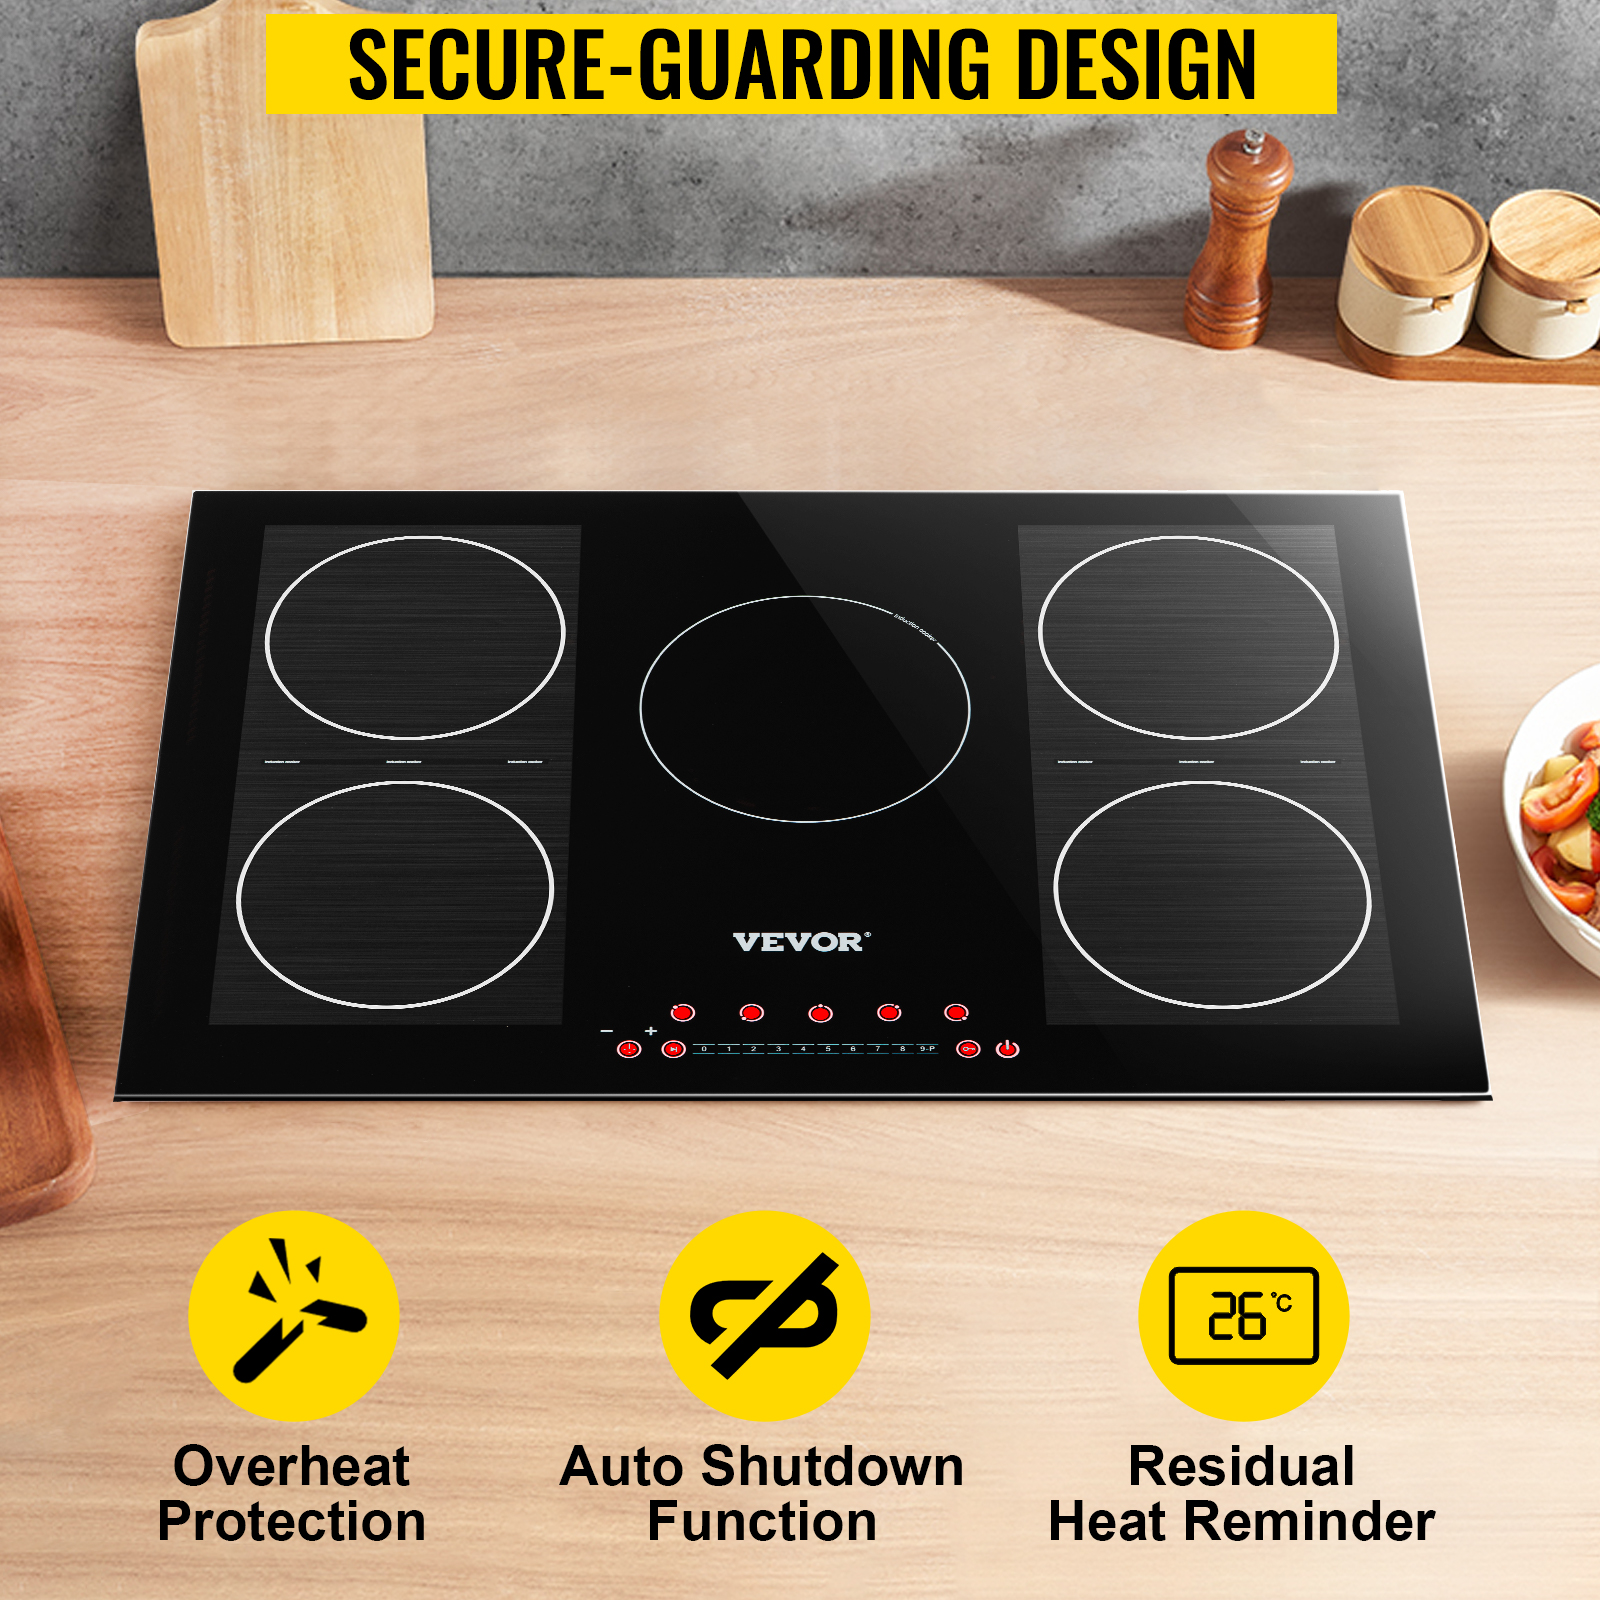 The D3 Series 30 Built-In Electric Cooktop is a powerful 5 burner cooktop  with a wide variety of surface element…